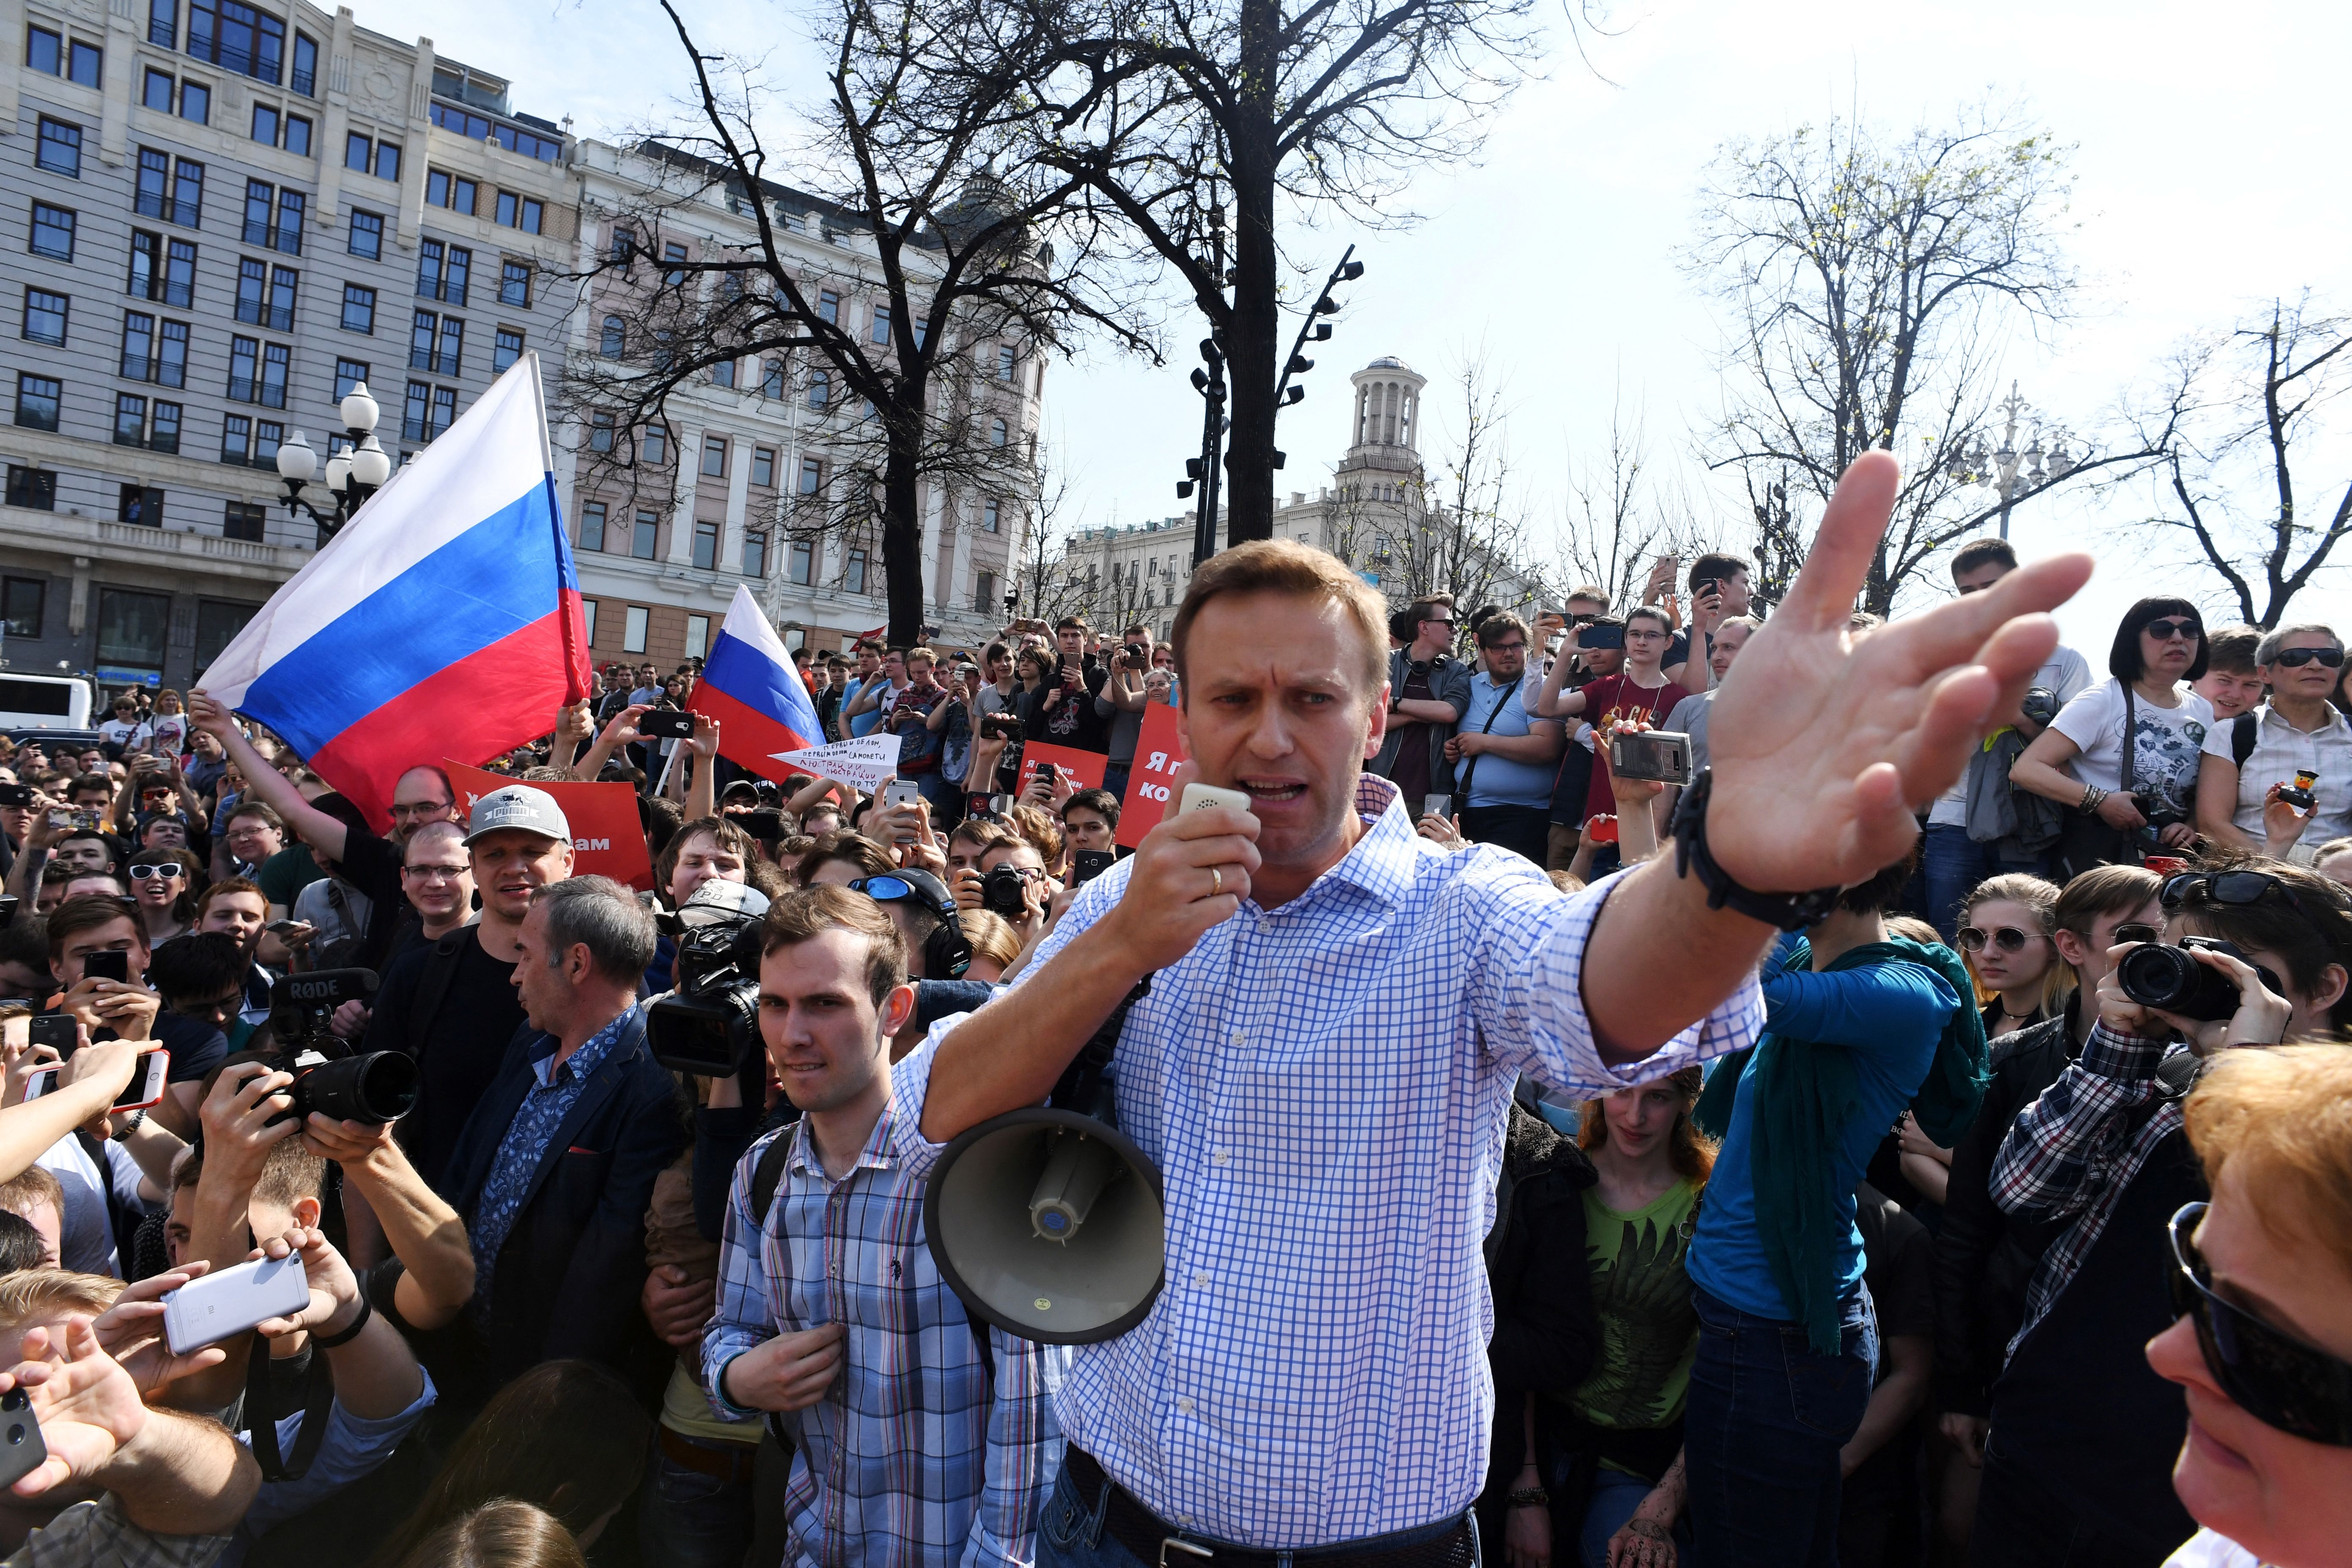 Russian opposition leader Alexei Navalny addresses supporters during an unauthorized anti-Putin rally on May 5, 2018 in Moscow